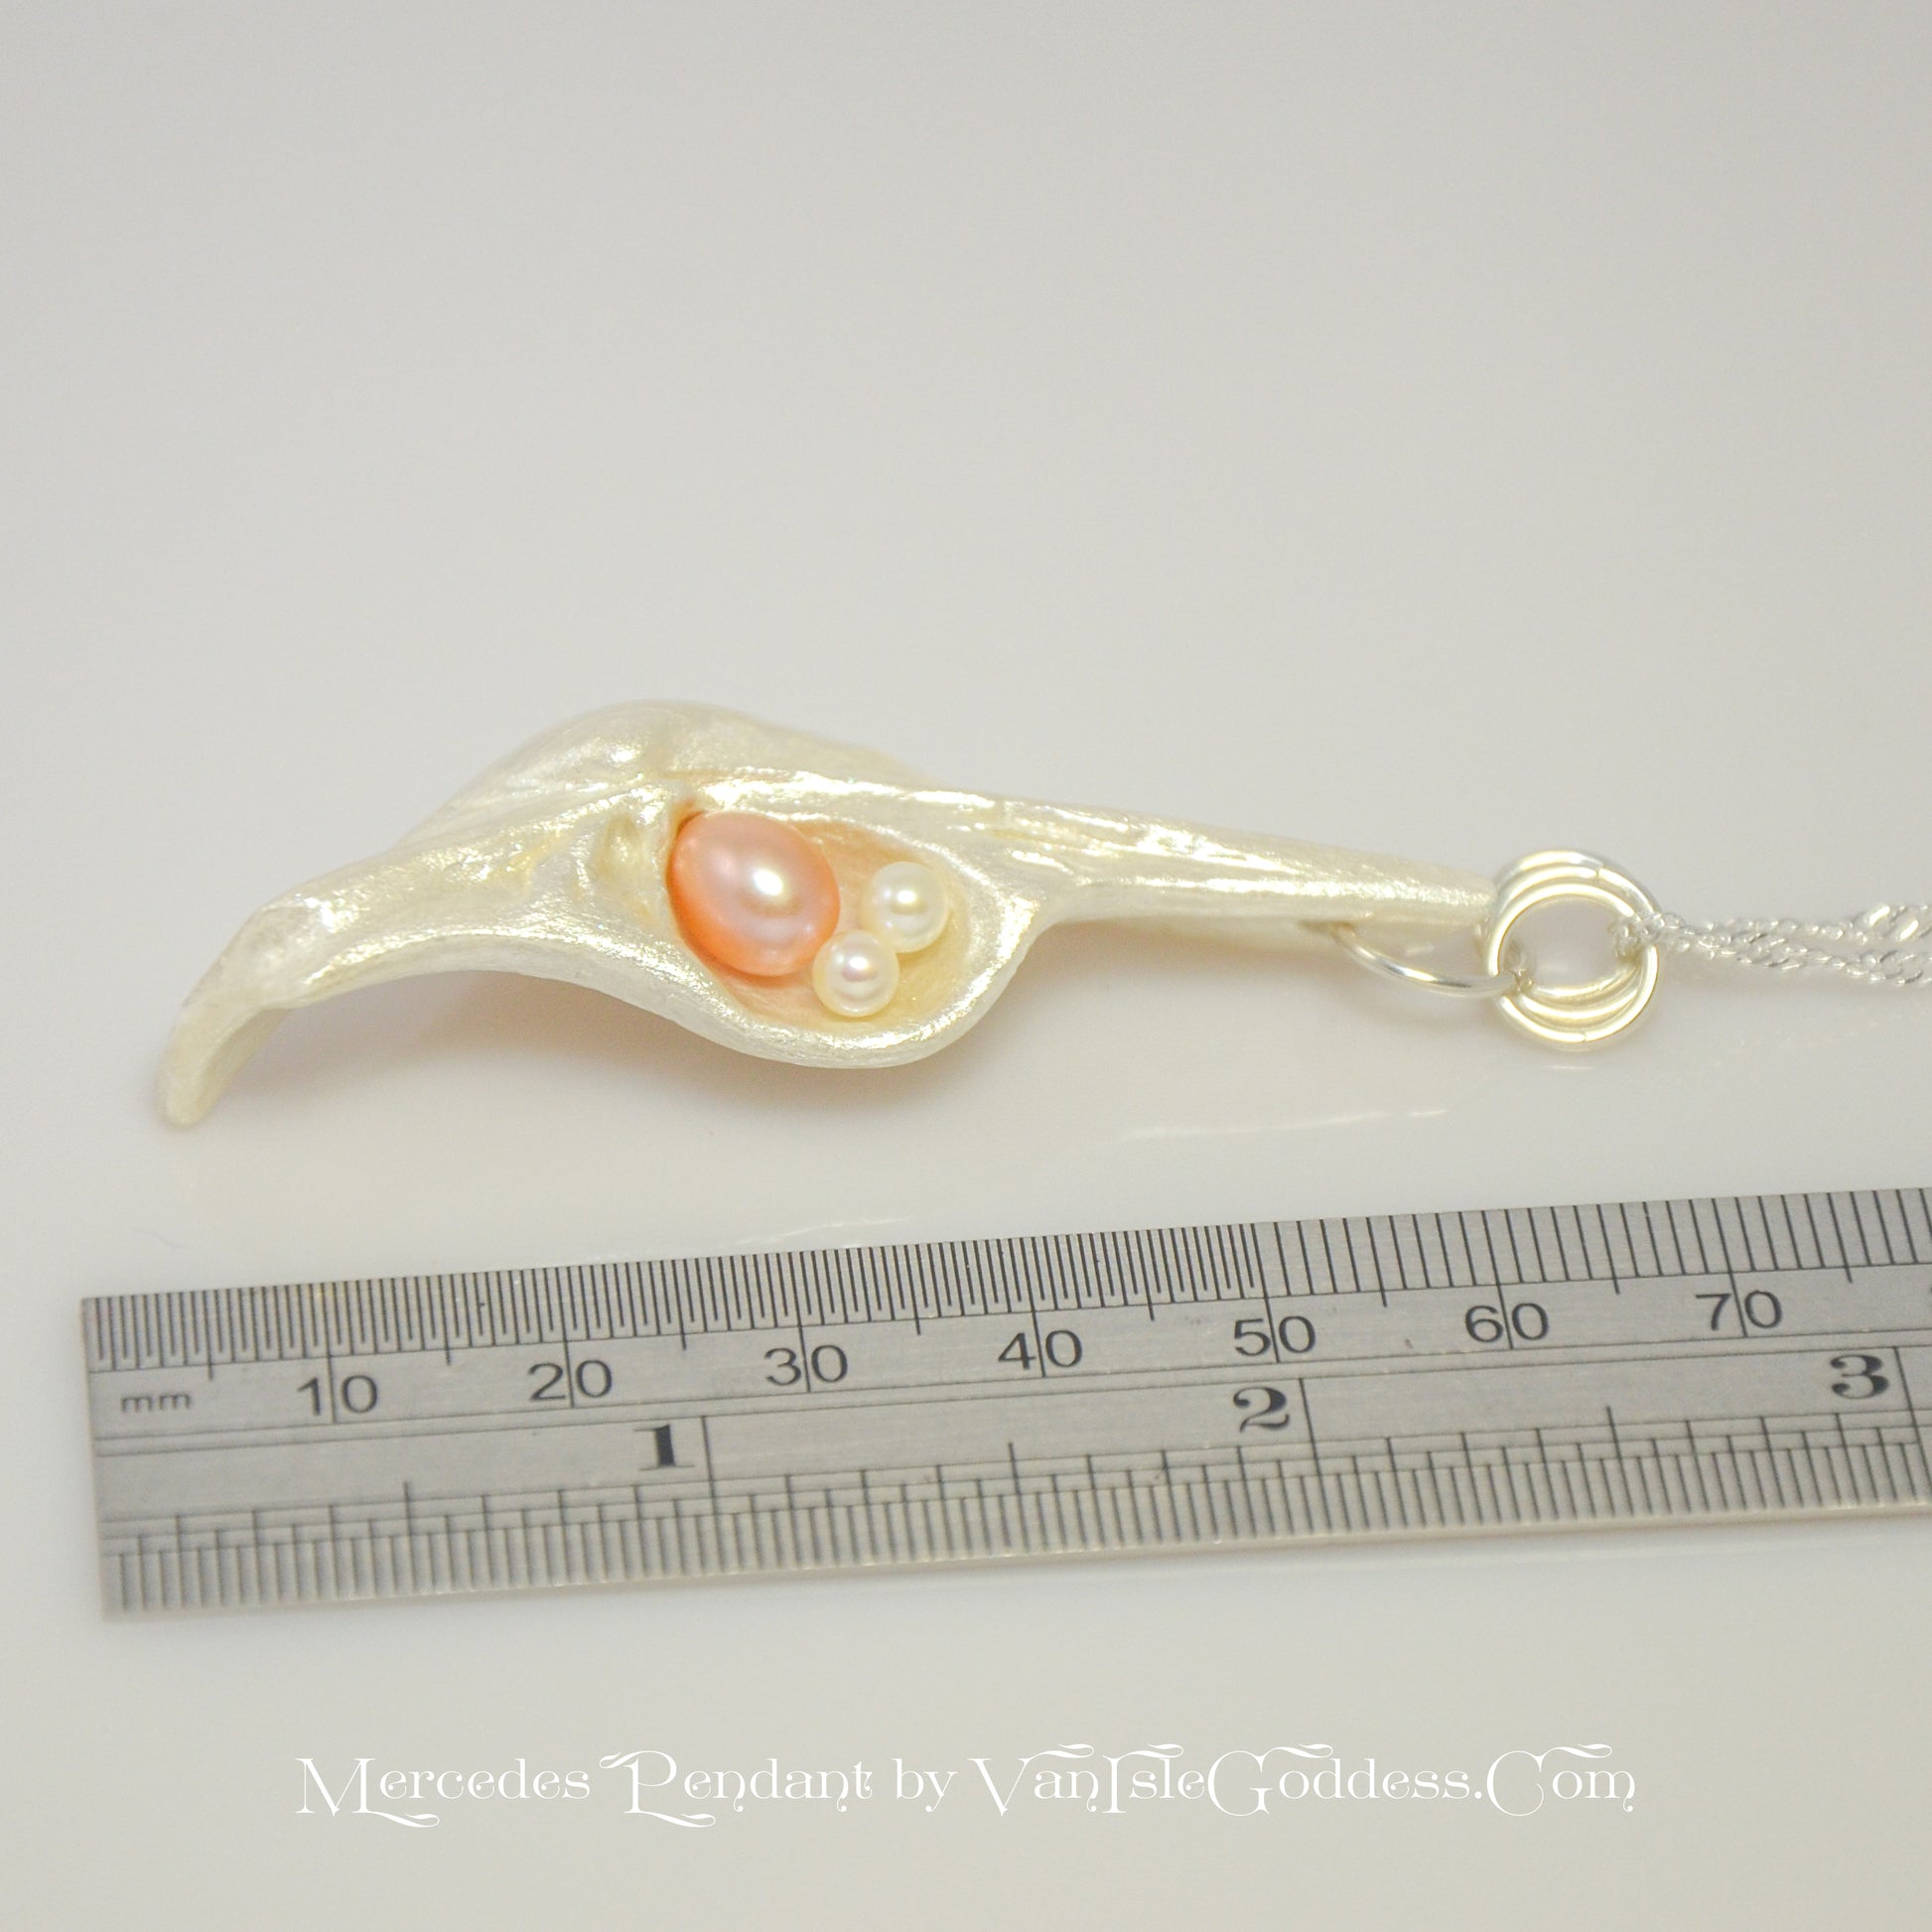 This natural seashell pendant has a real 7-8mm pink freshwater pearl and two baby pearls.  The pendant is shown along side a ruler so the viewer can see the length of the pendant.